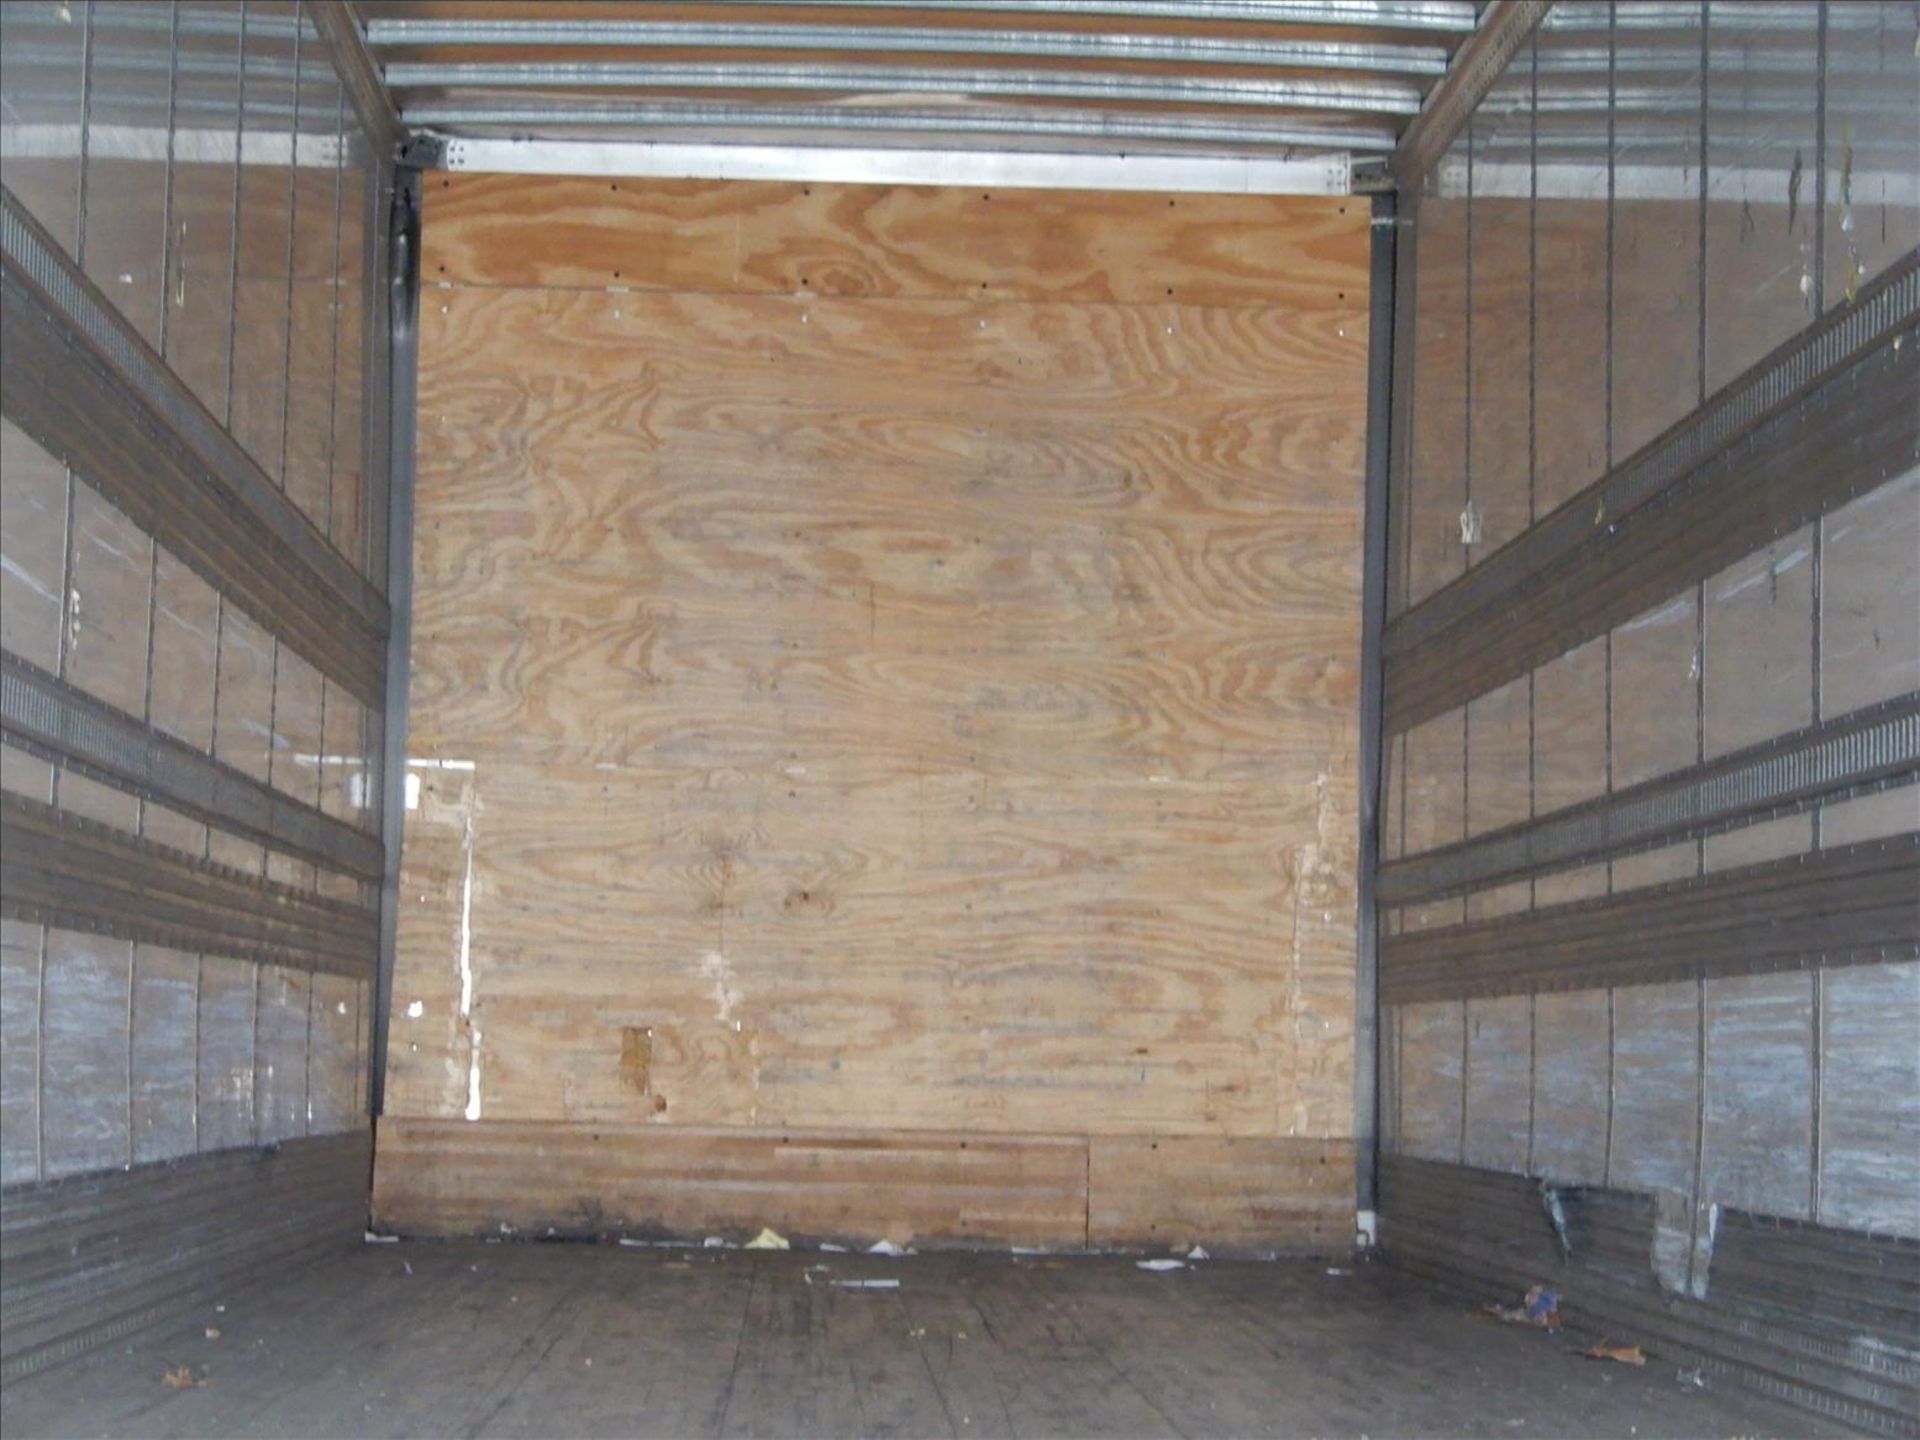 2012 Stoughton Trailer - Located in Indianapolis, IN - Image 25 of 31